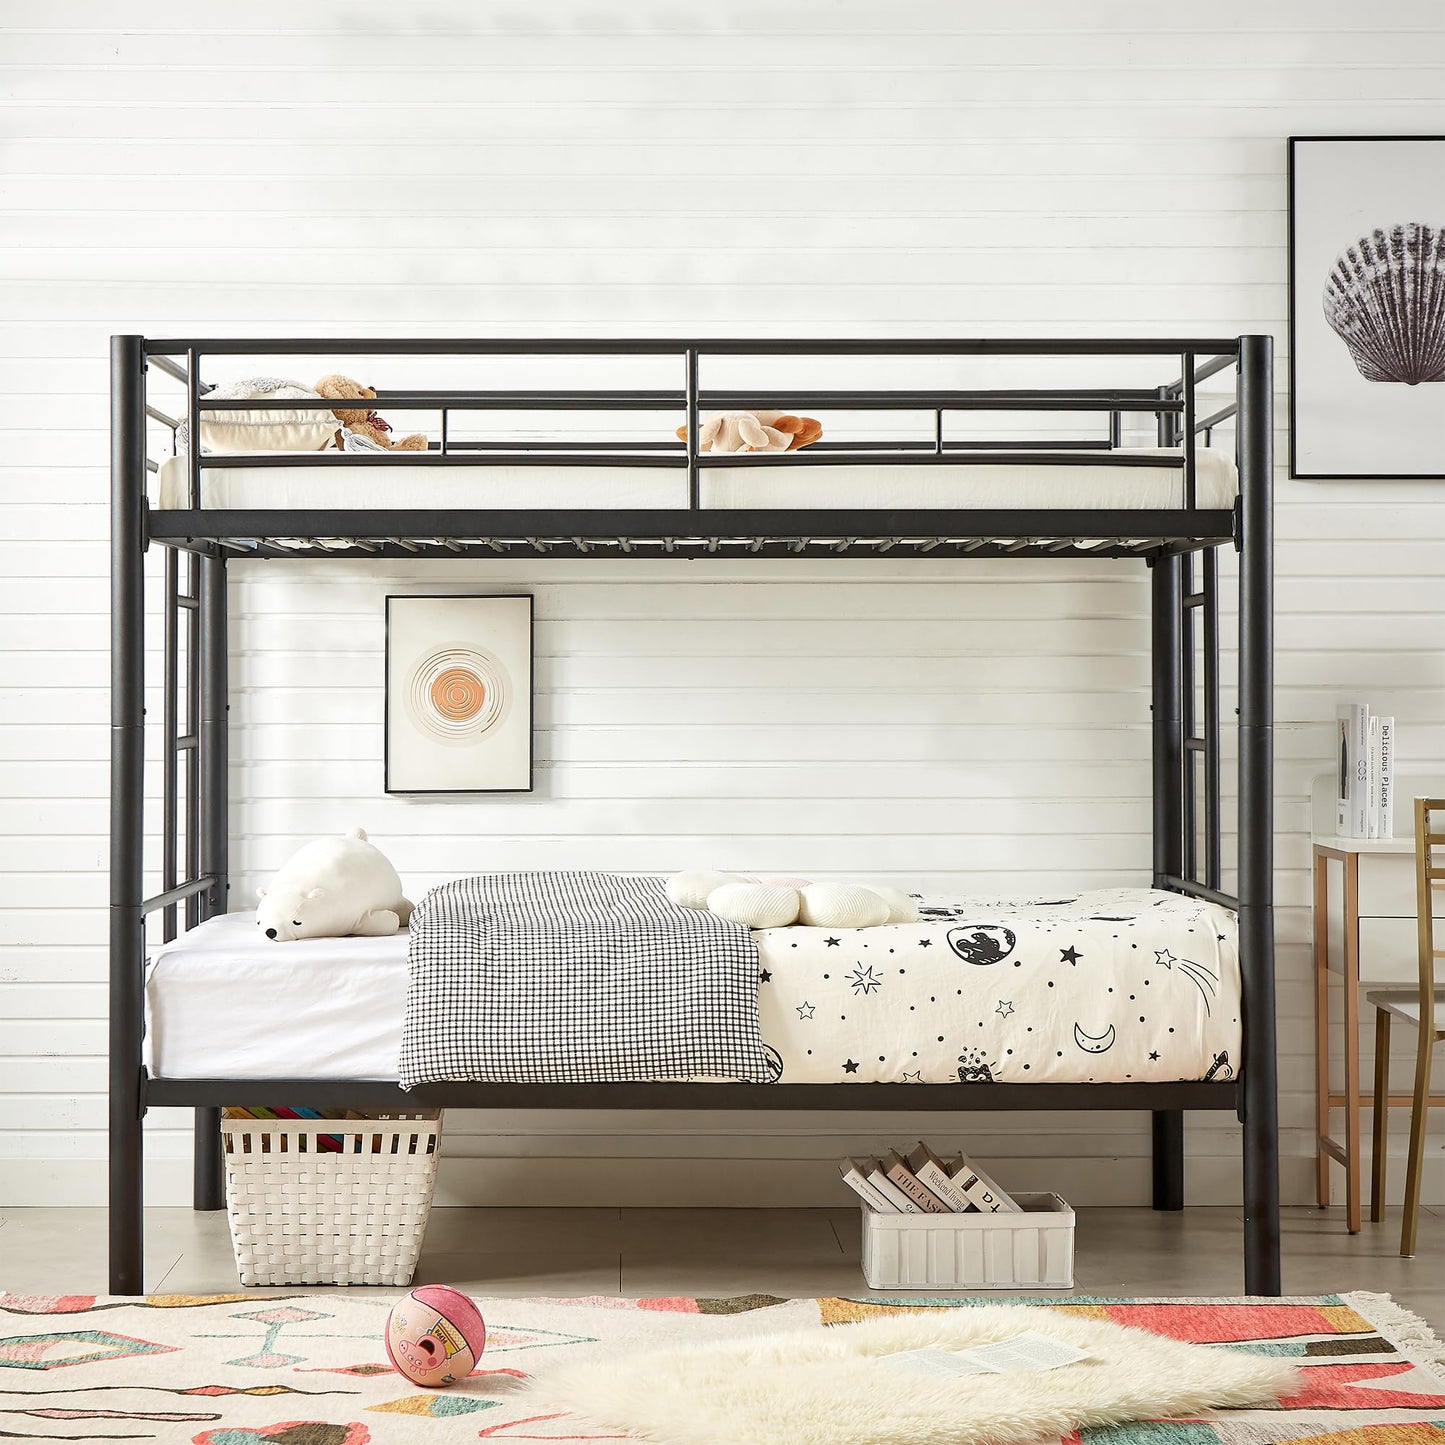 VECELO Metal Bunk Bed Twin Over Twin, Industrial Bunkbeds with Ladder and Full-Length Guardrail, Noise Free, No Boxing Spring Needed, Black